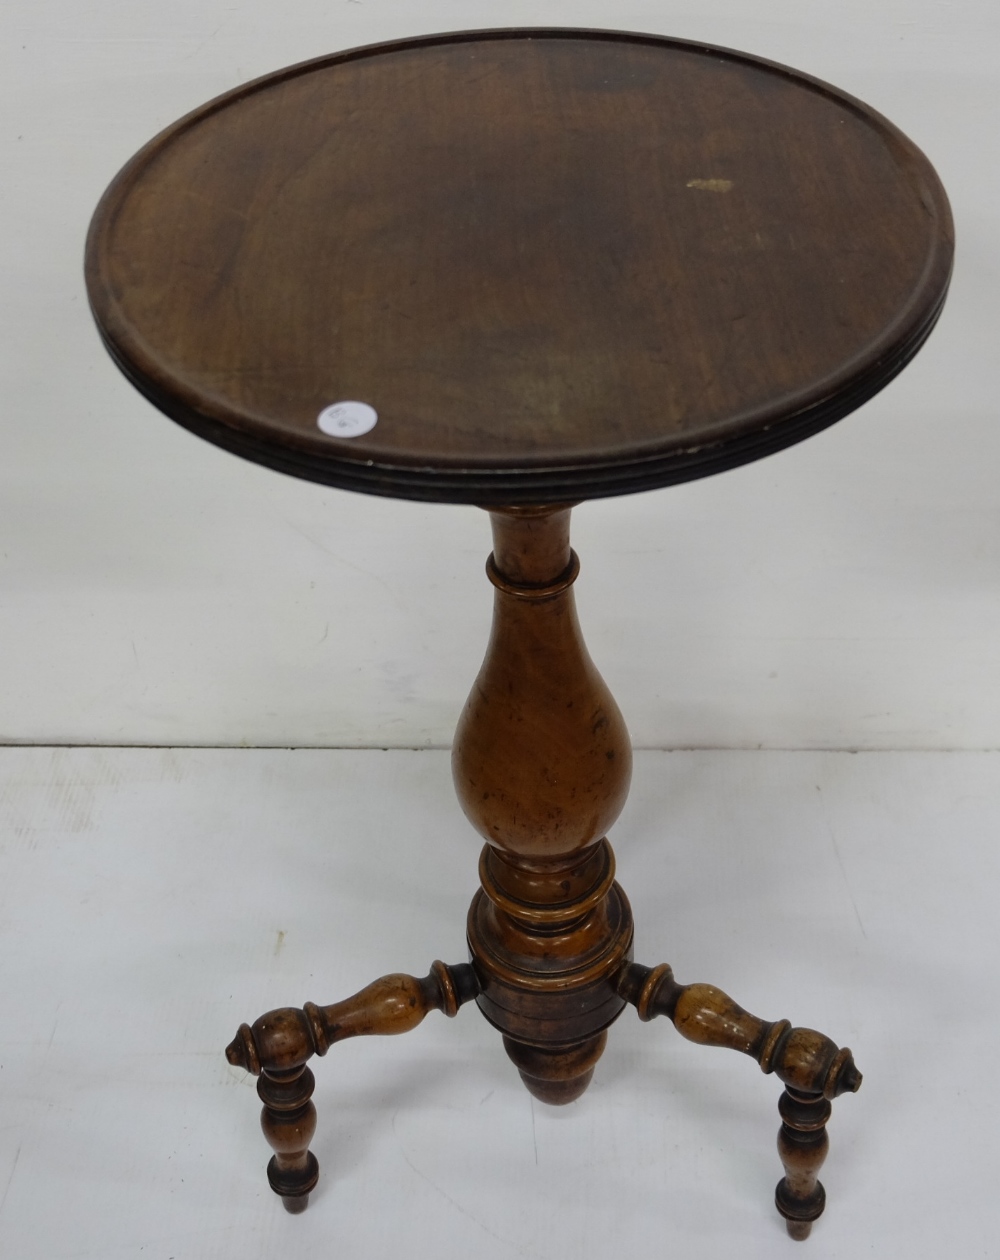 Mahogany Wine Table, circular top 13” dia, on a tripod base with turned legs